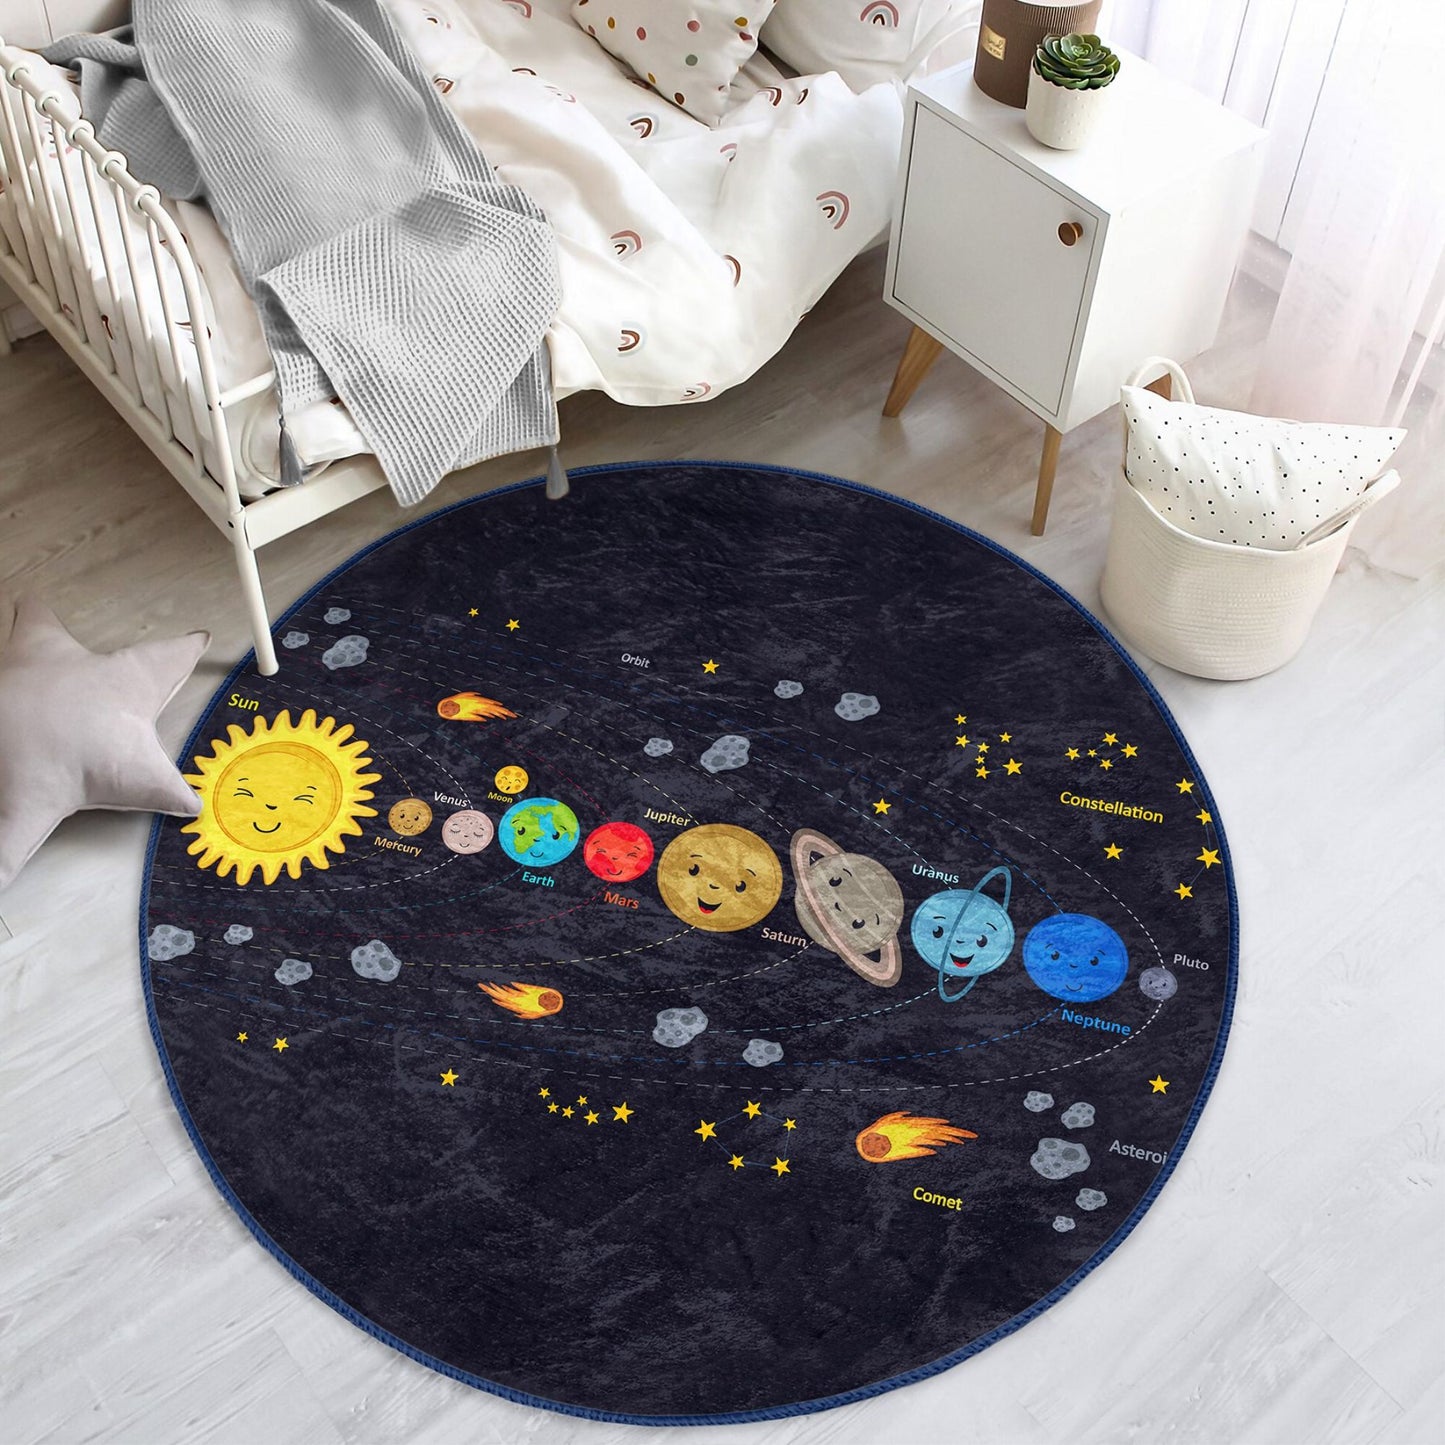 Colorful and Educational Kids' Room Decor